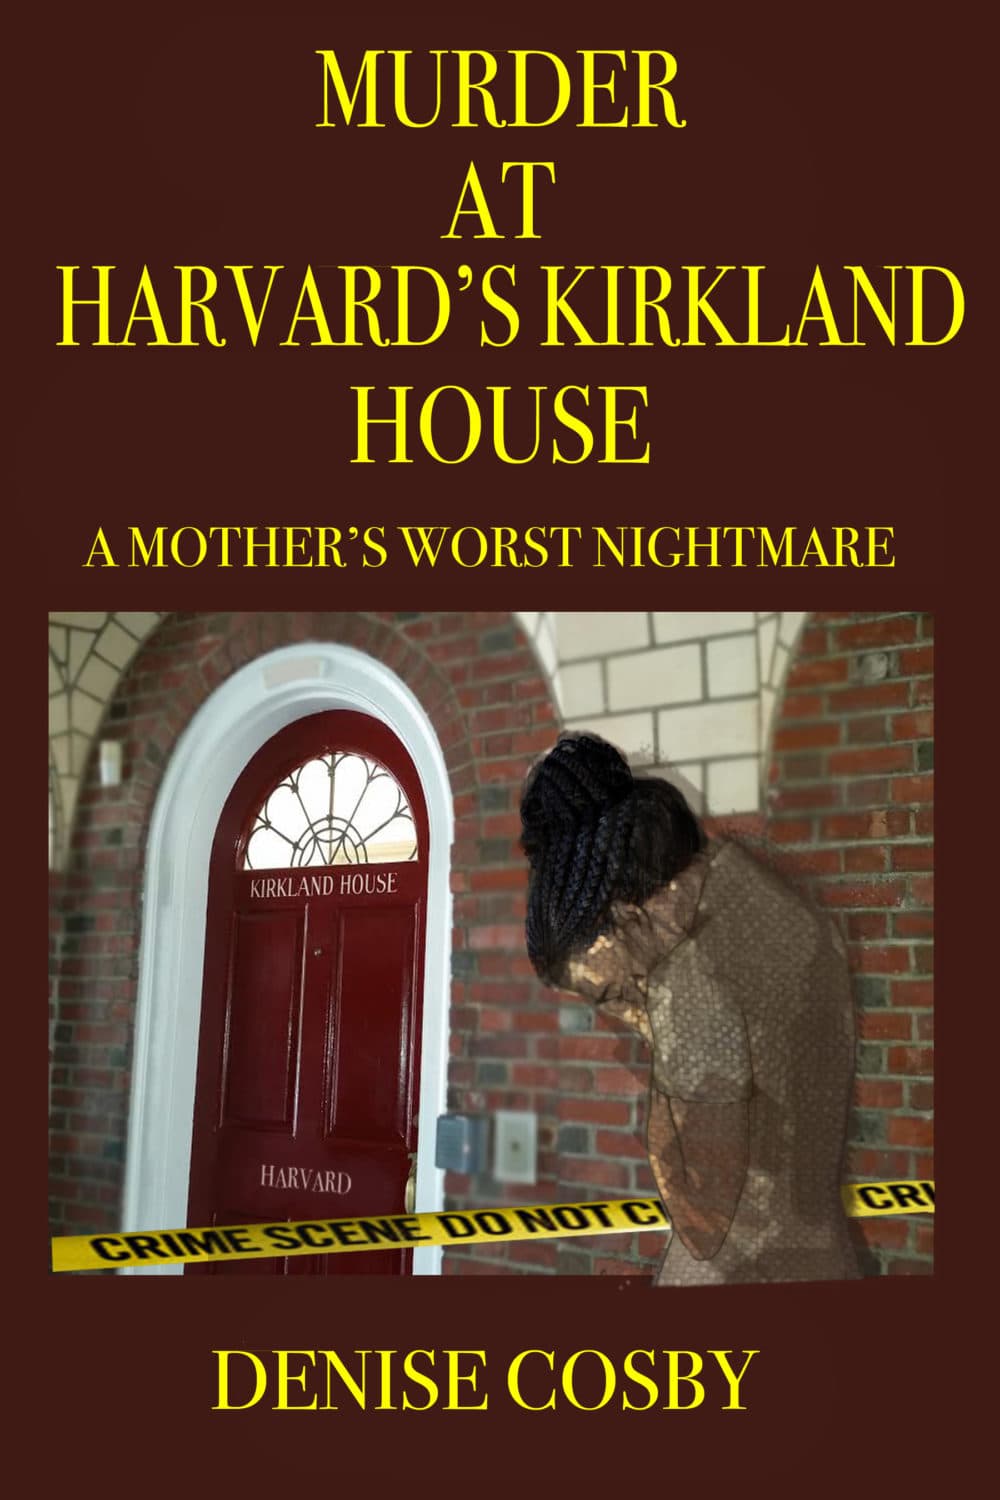 &quot;Murder at Harvard's Kirkland House: A Mother's Worst Nightmare&quot; by Denise Cosby. (Courtesy of Denise Cosby).